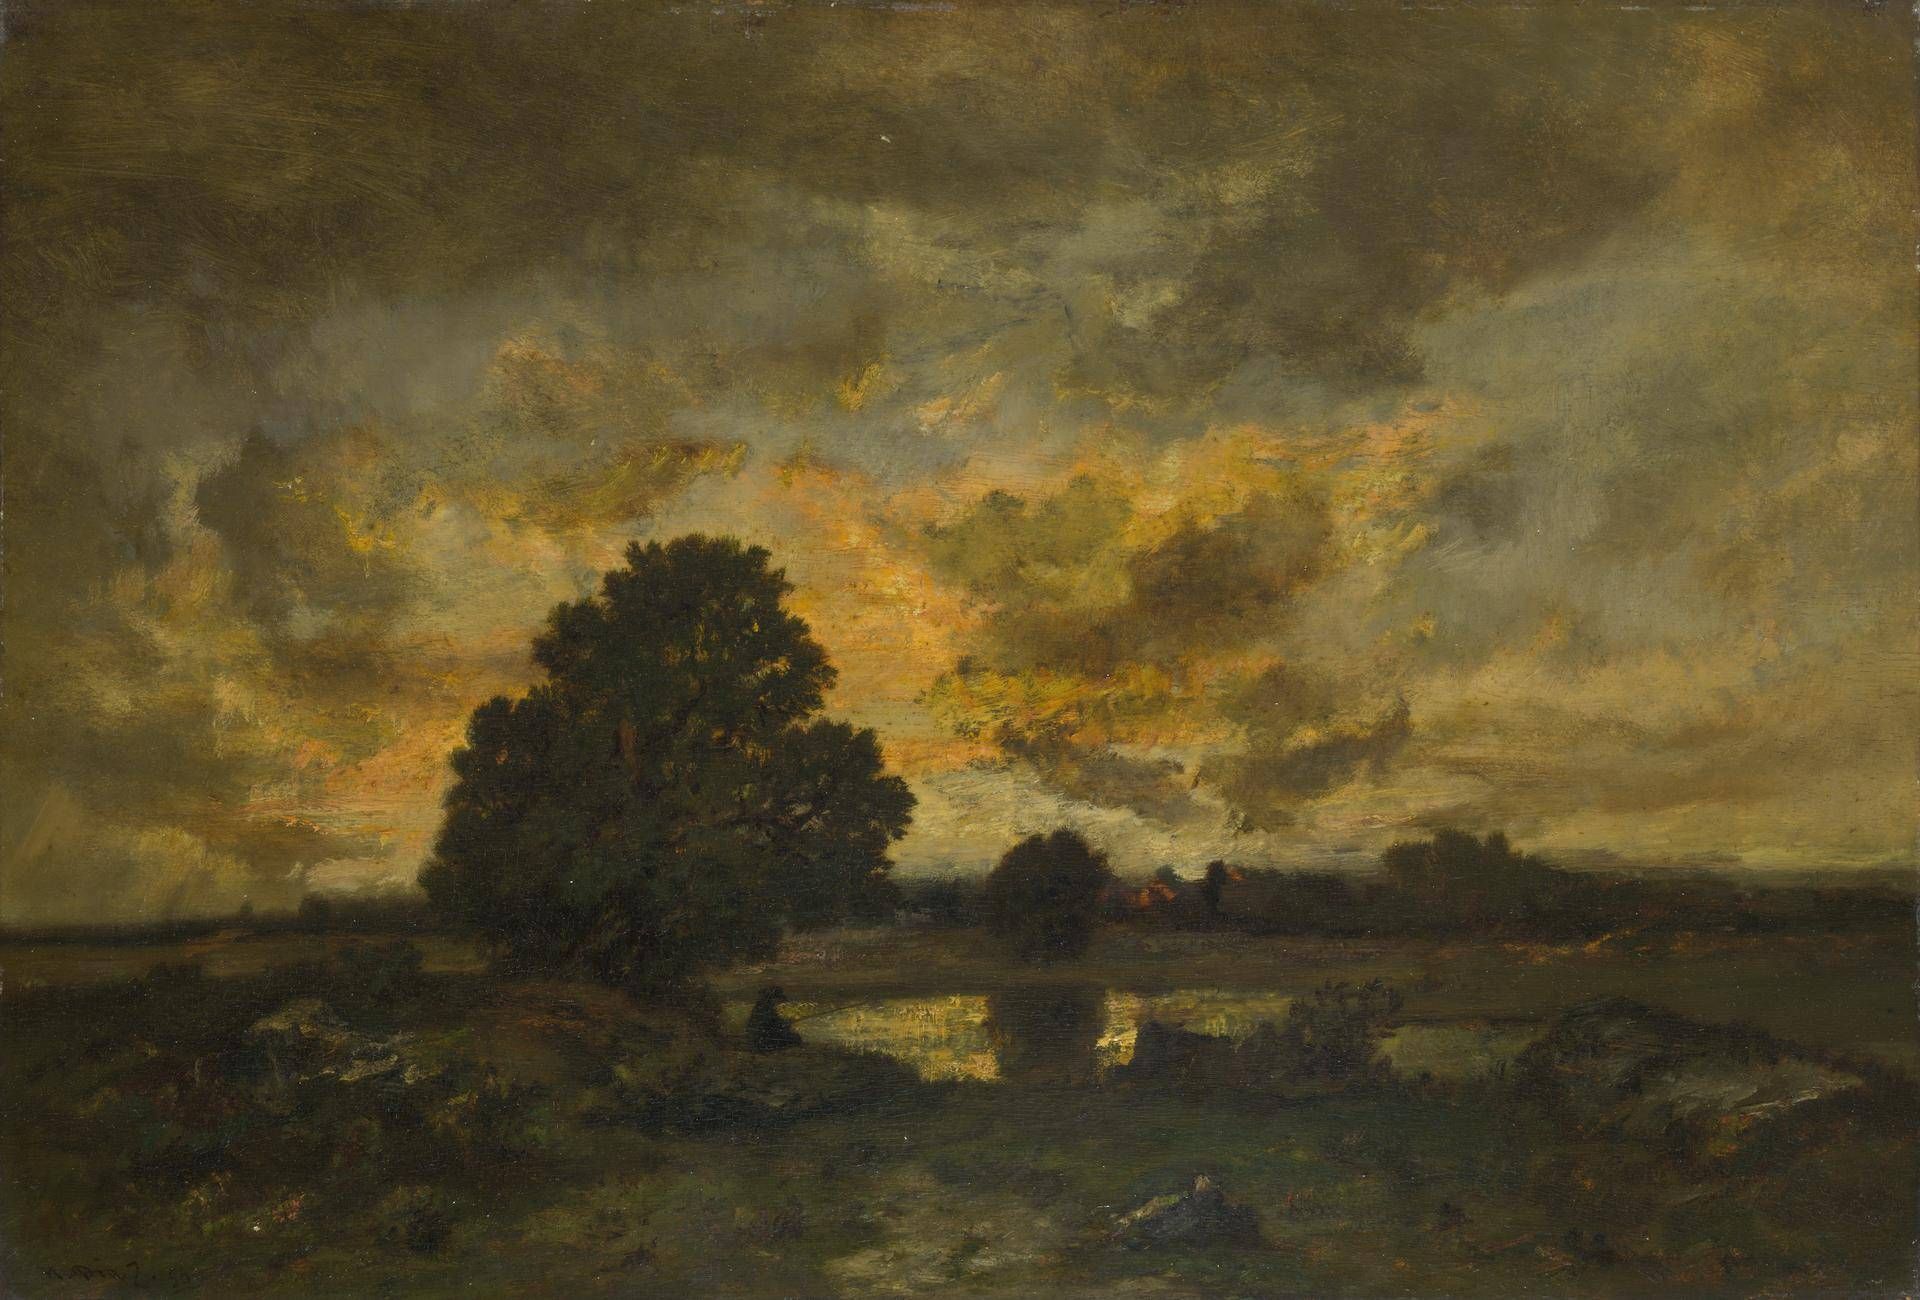 Common with Stormy Sunset